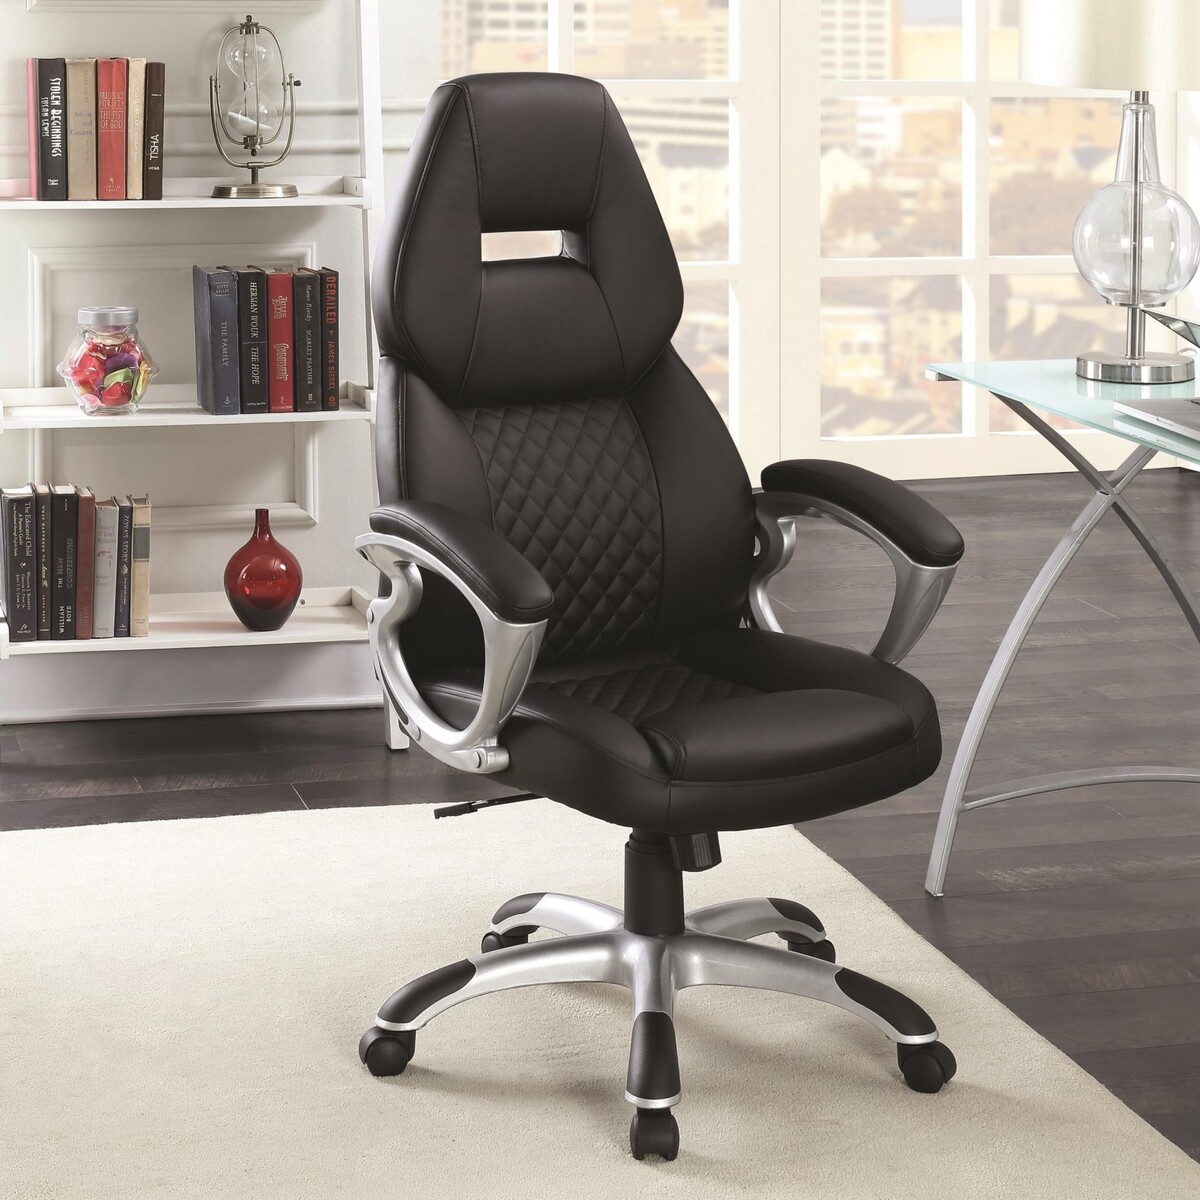 What Is The Best Office Chair